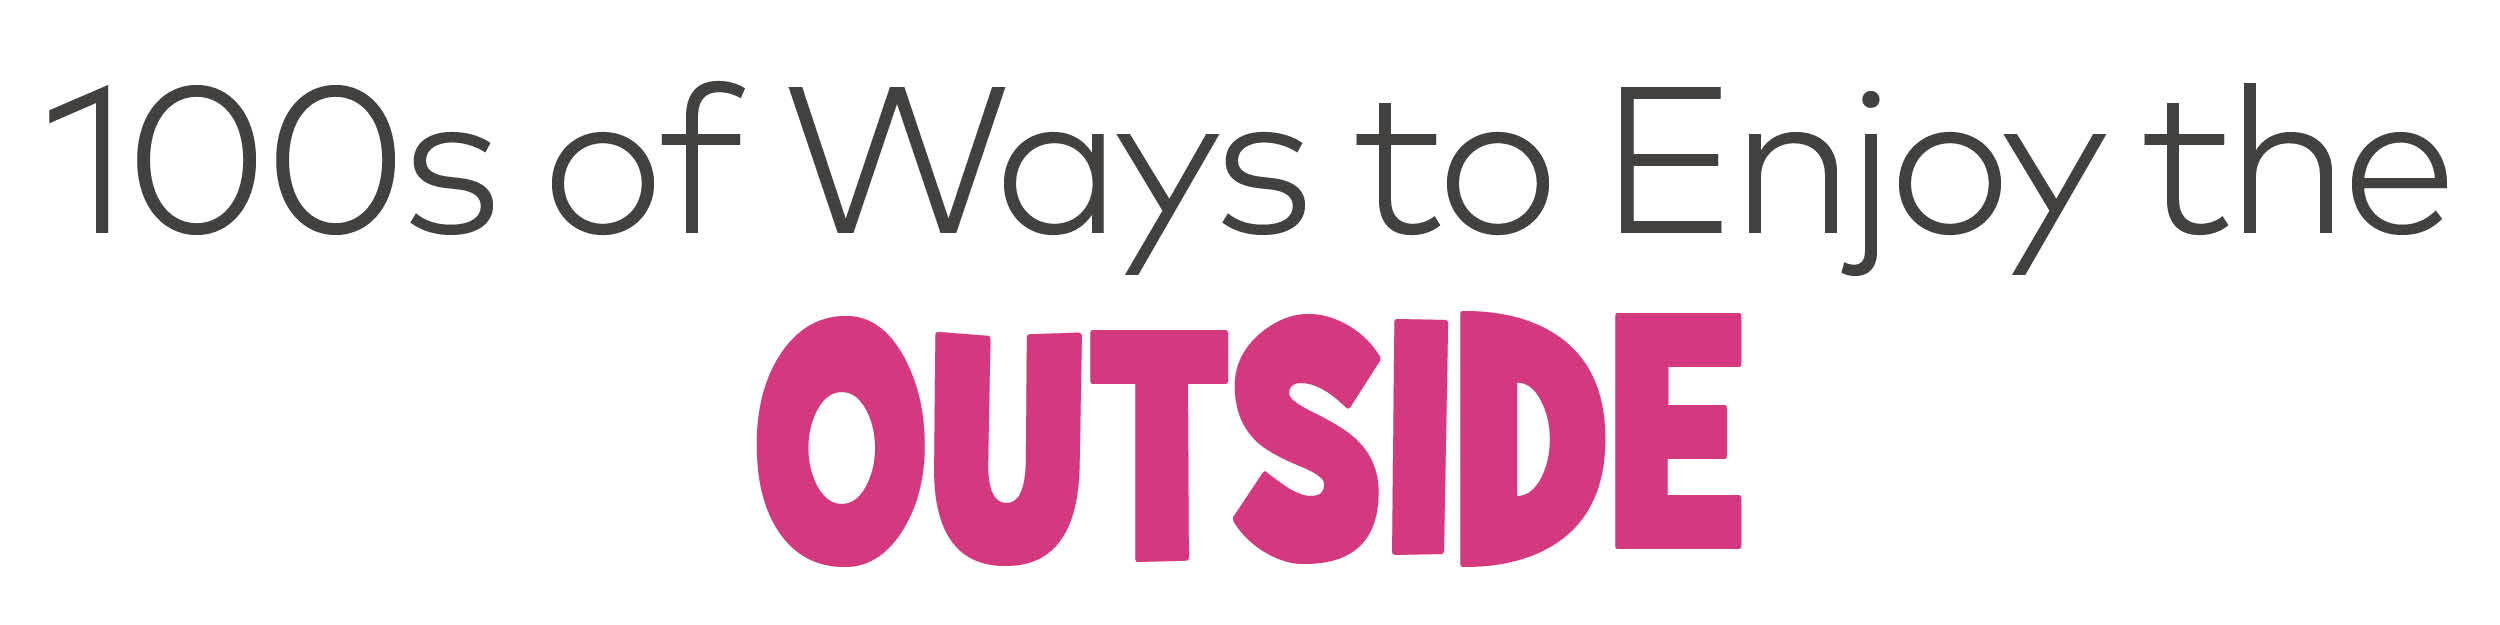 100s of ways to enjoy the outside